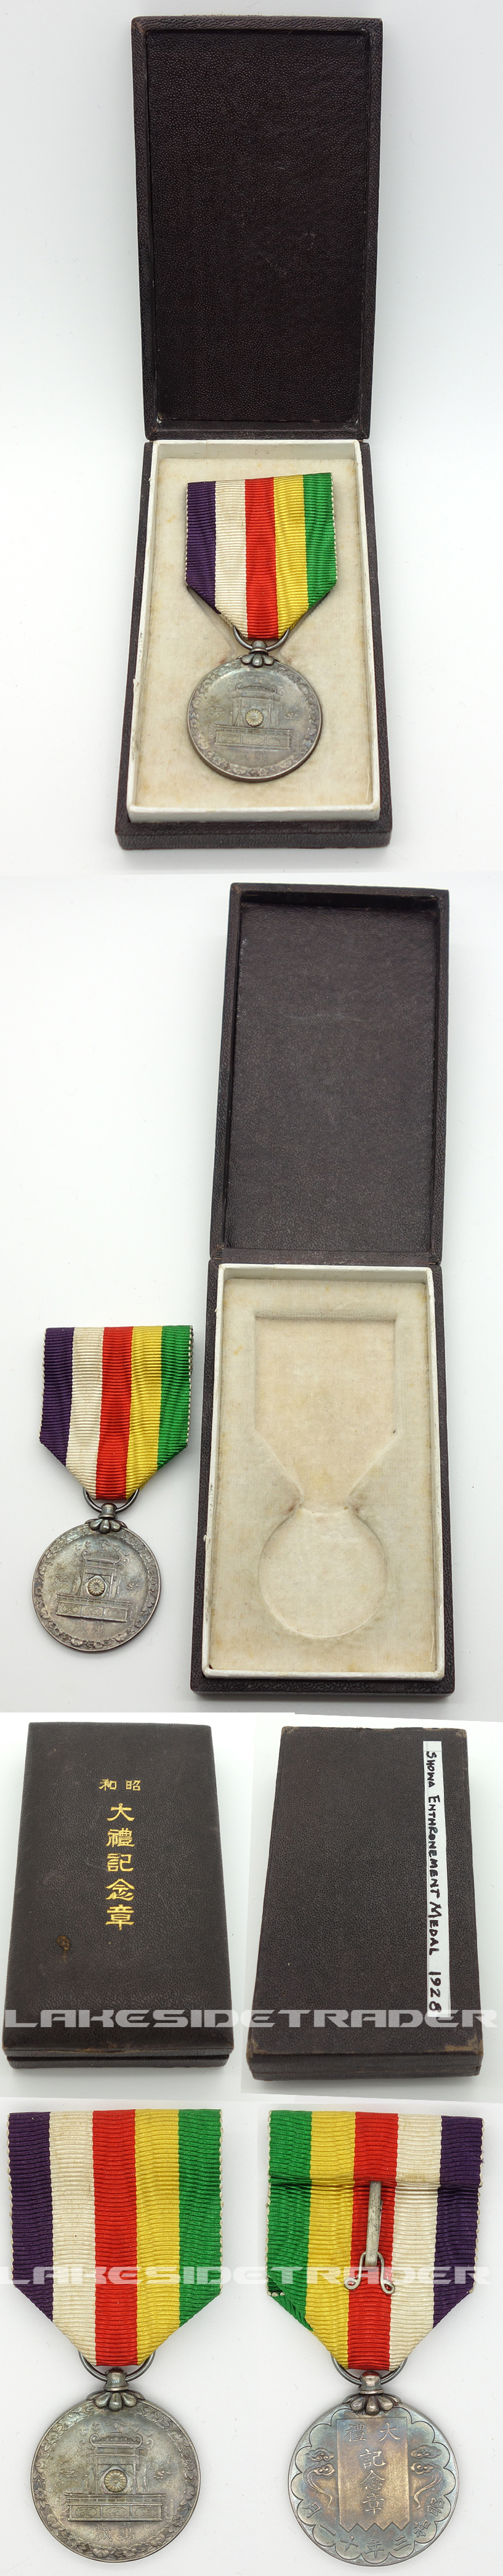 Cased Showa Grand Enthronement Medal